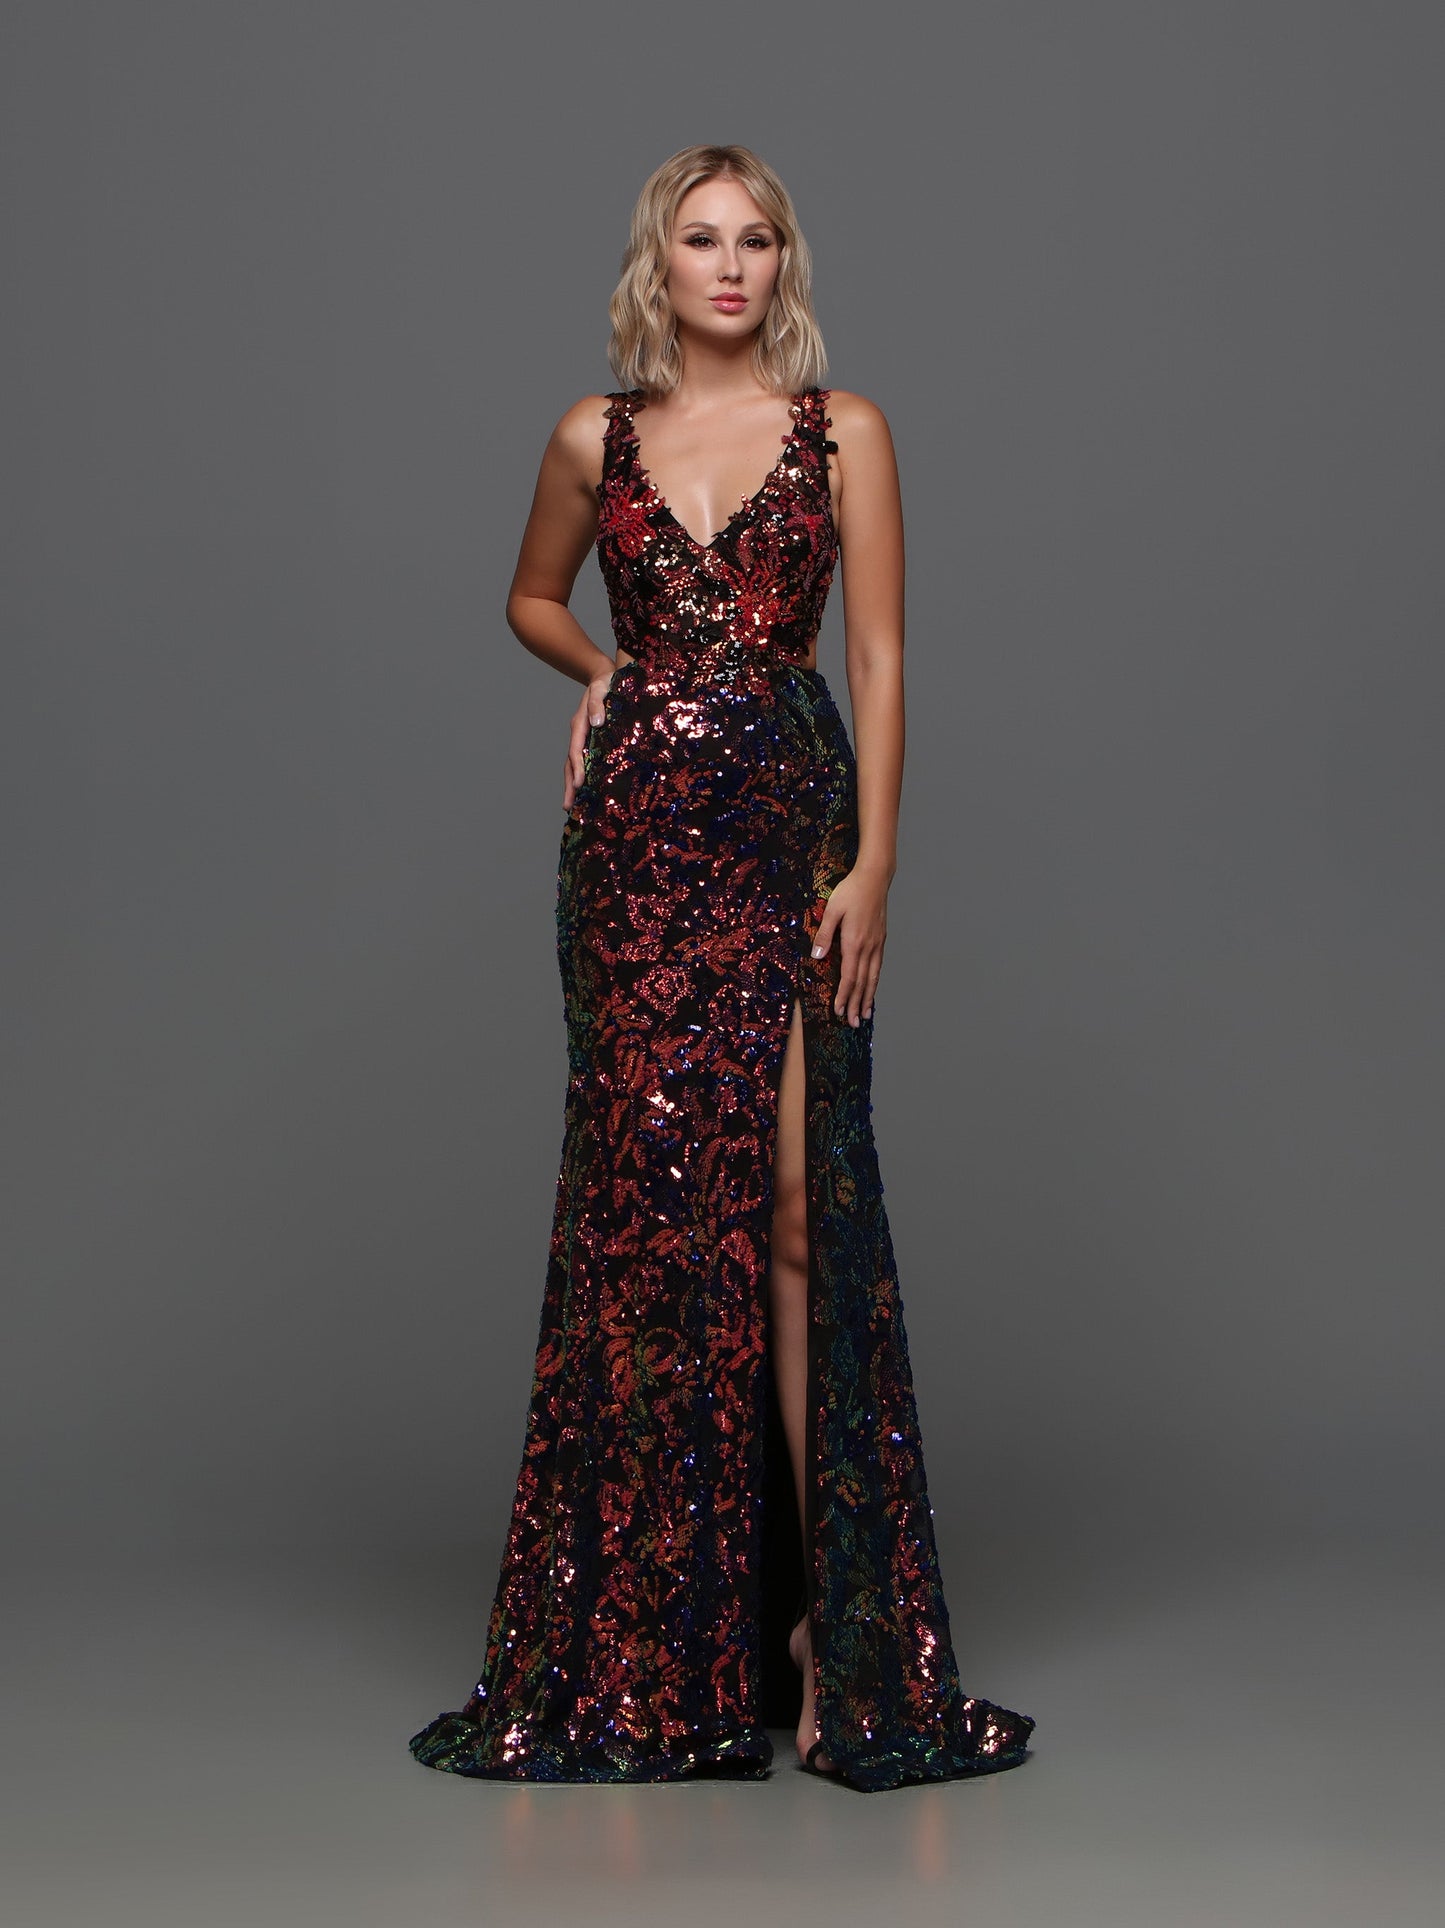 Be the shining star of the prom in the Candice Wang 72372 dress. This fitted sequin gown features a V-neckline, Cutout racerback, and slit for an alluring look. The perfect combination of elegance and edge, this dress is sure to make a statement at any formal event.   Sizes: 0-20  Colors: Black/Multi